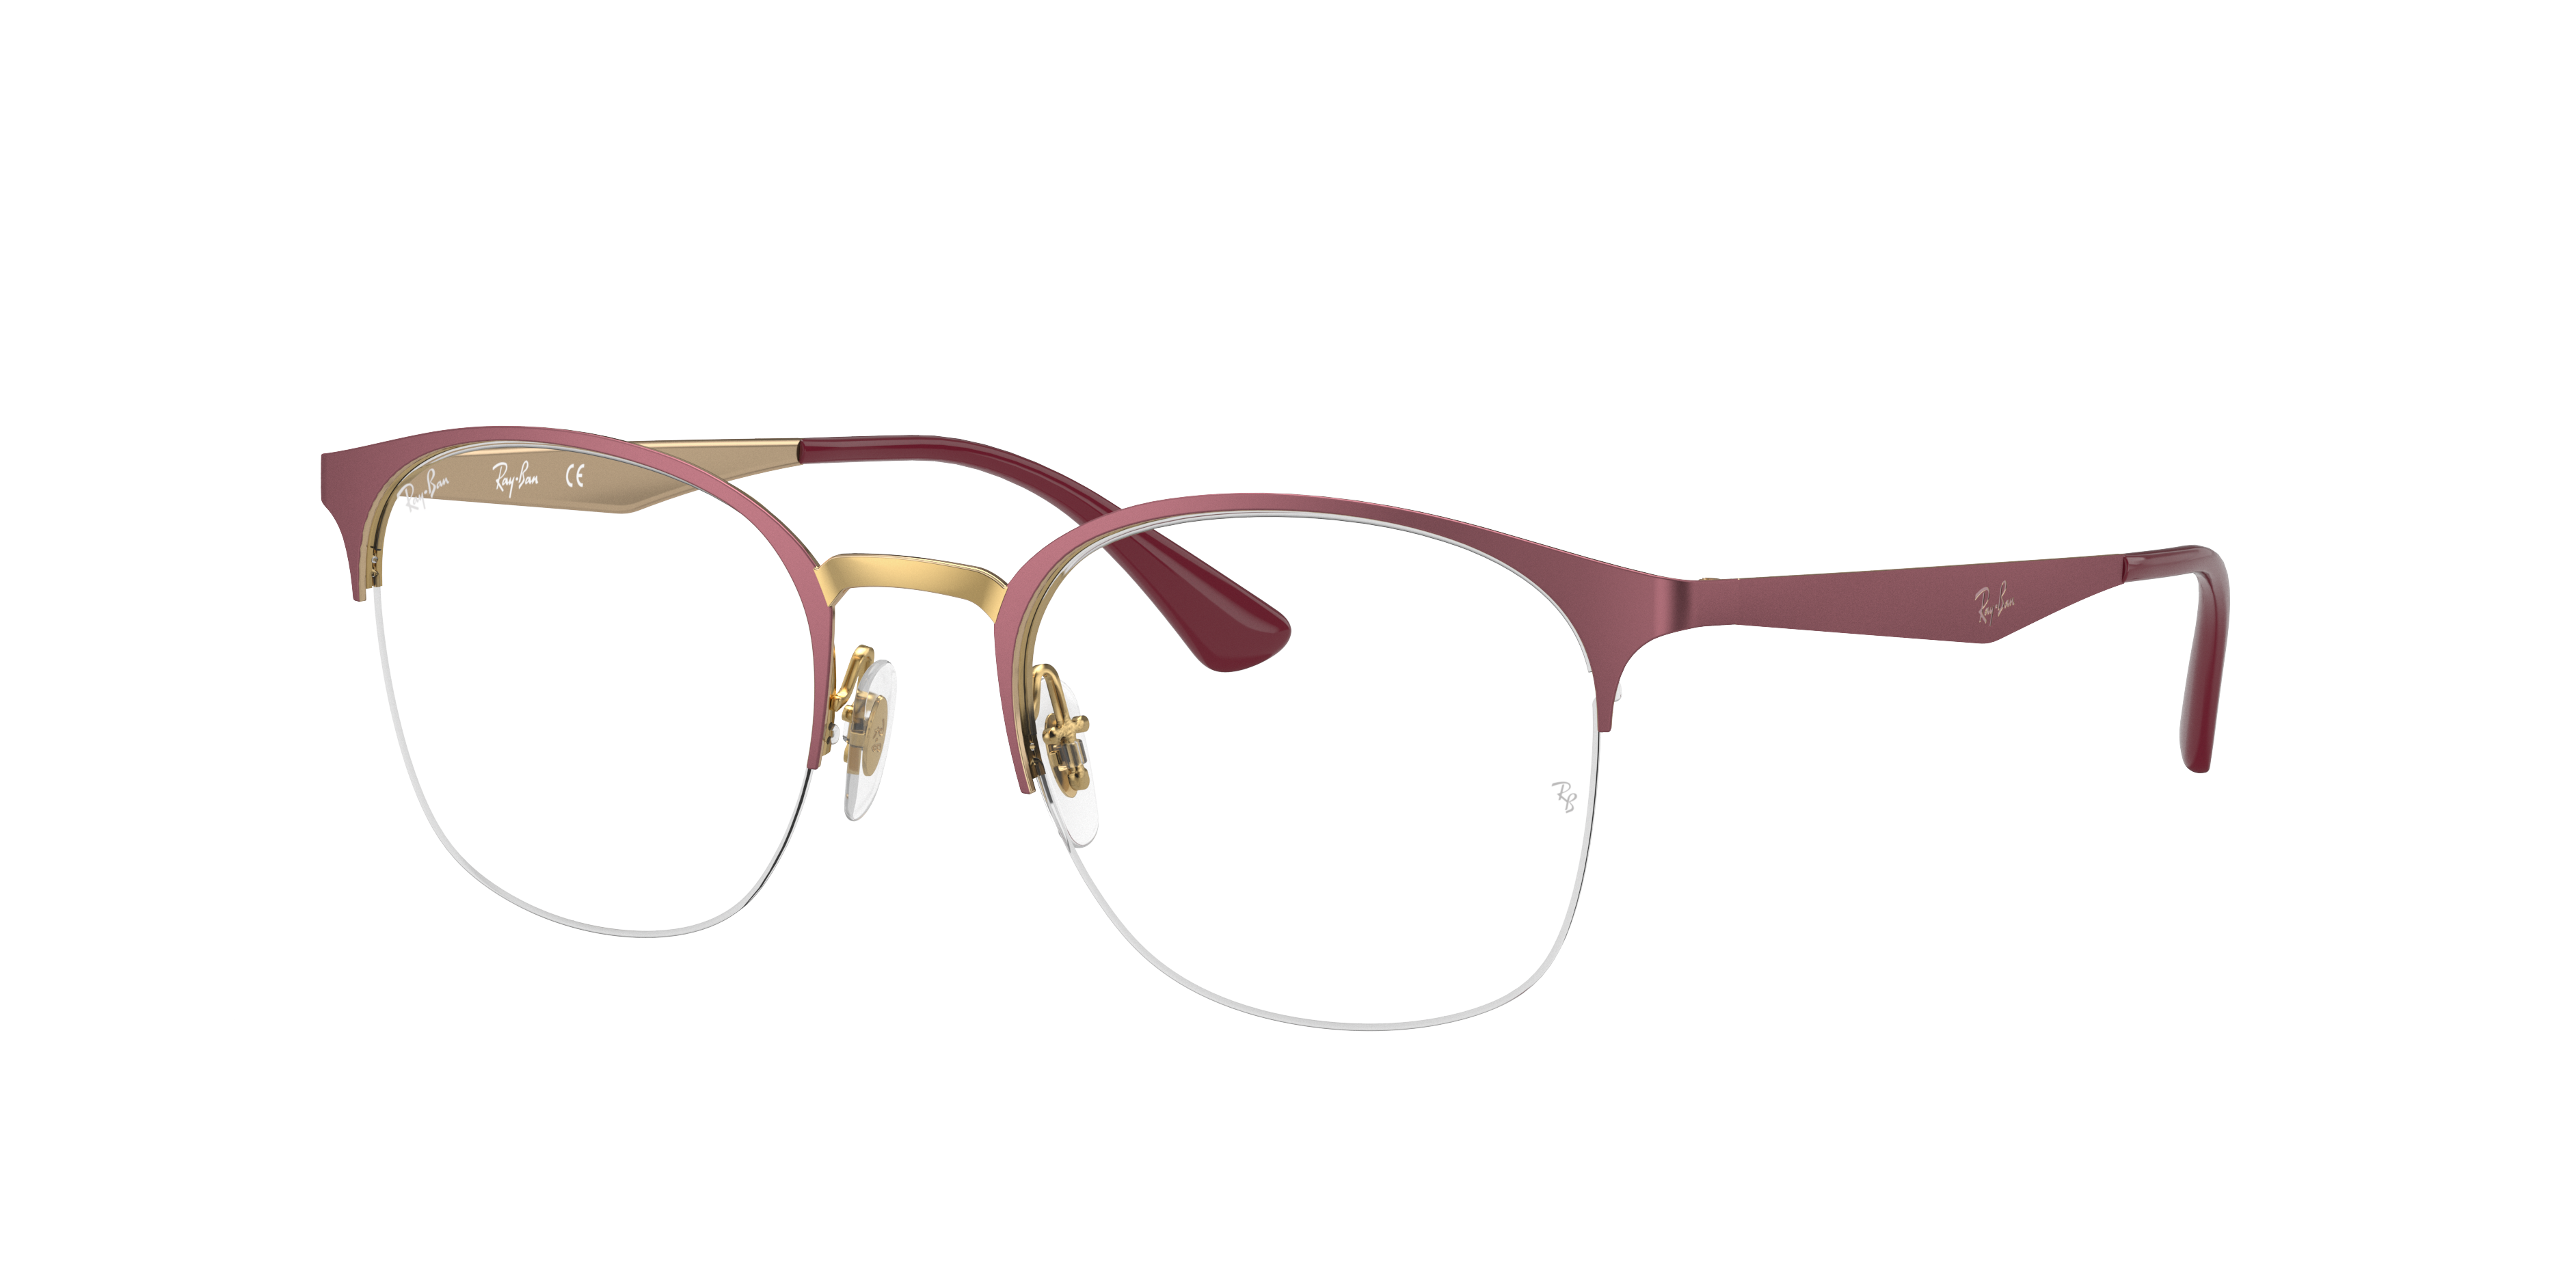 lenscrafters raybans